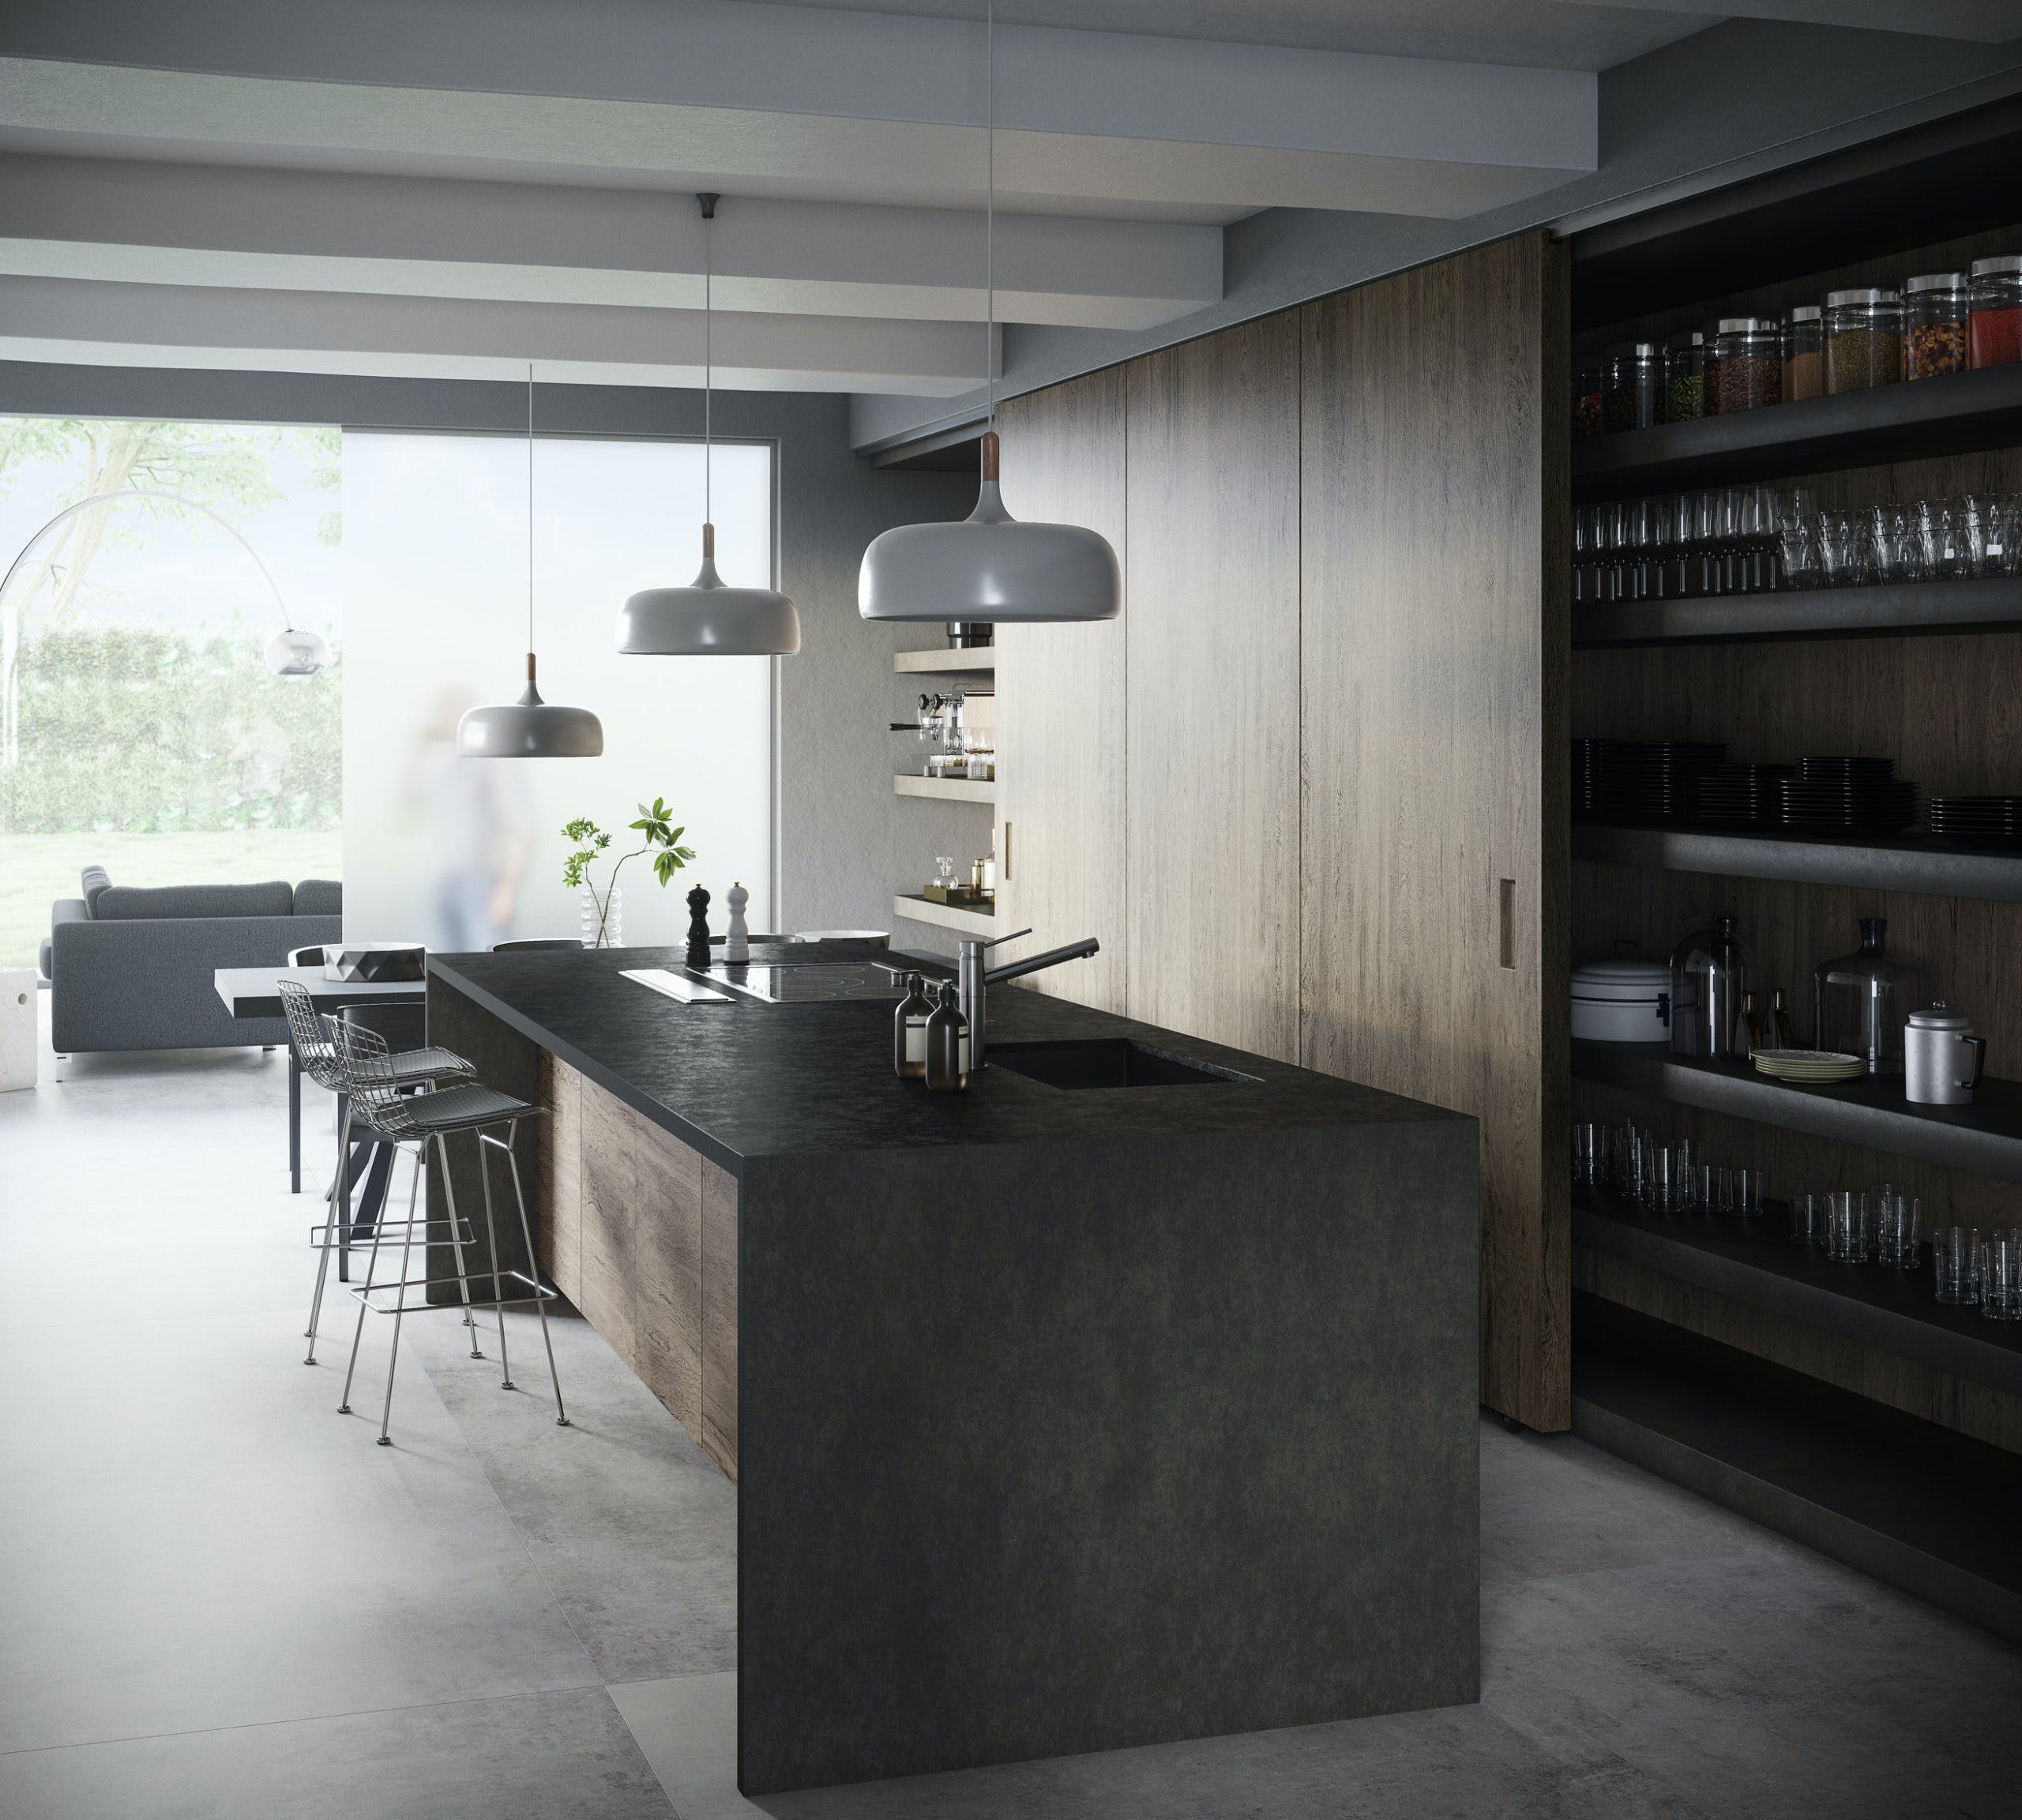 Image 33 of Dekton Kitchen Milar Resized 1 scaled 1 in How to organise your kitchen and keep it that way - Cosentino